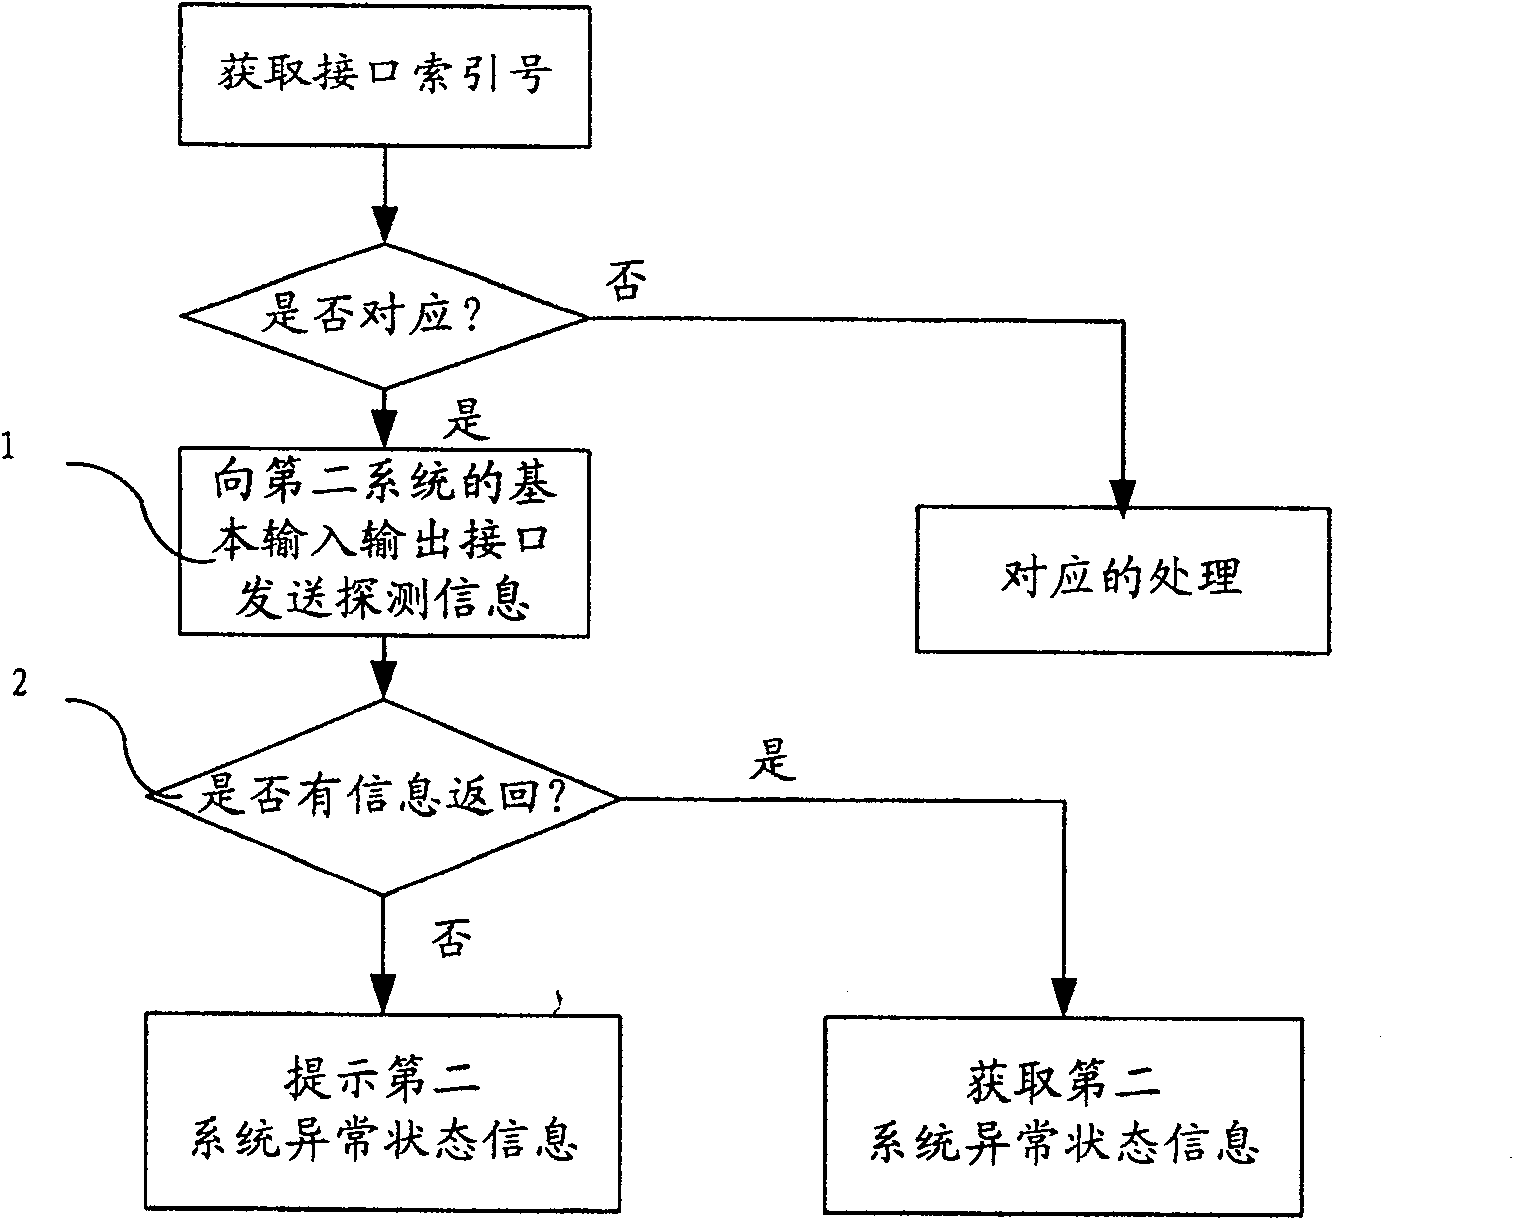 Method and device for obtaining the system status